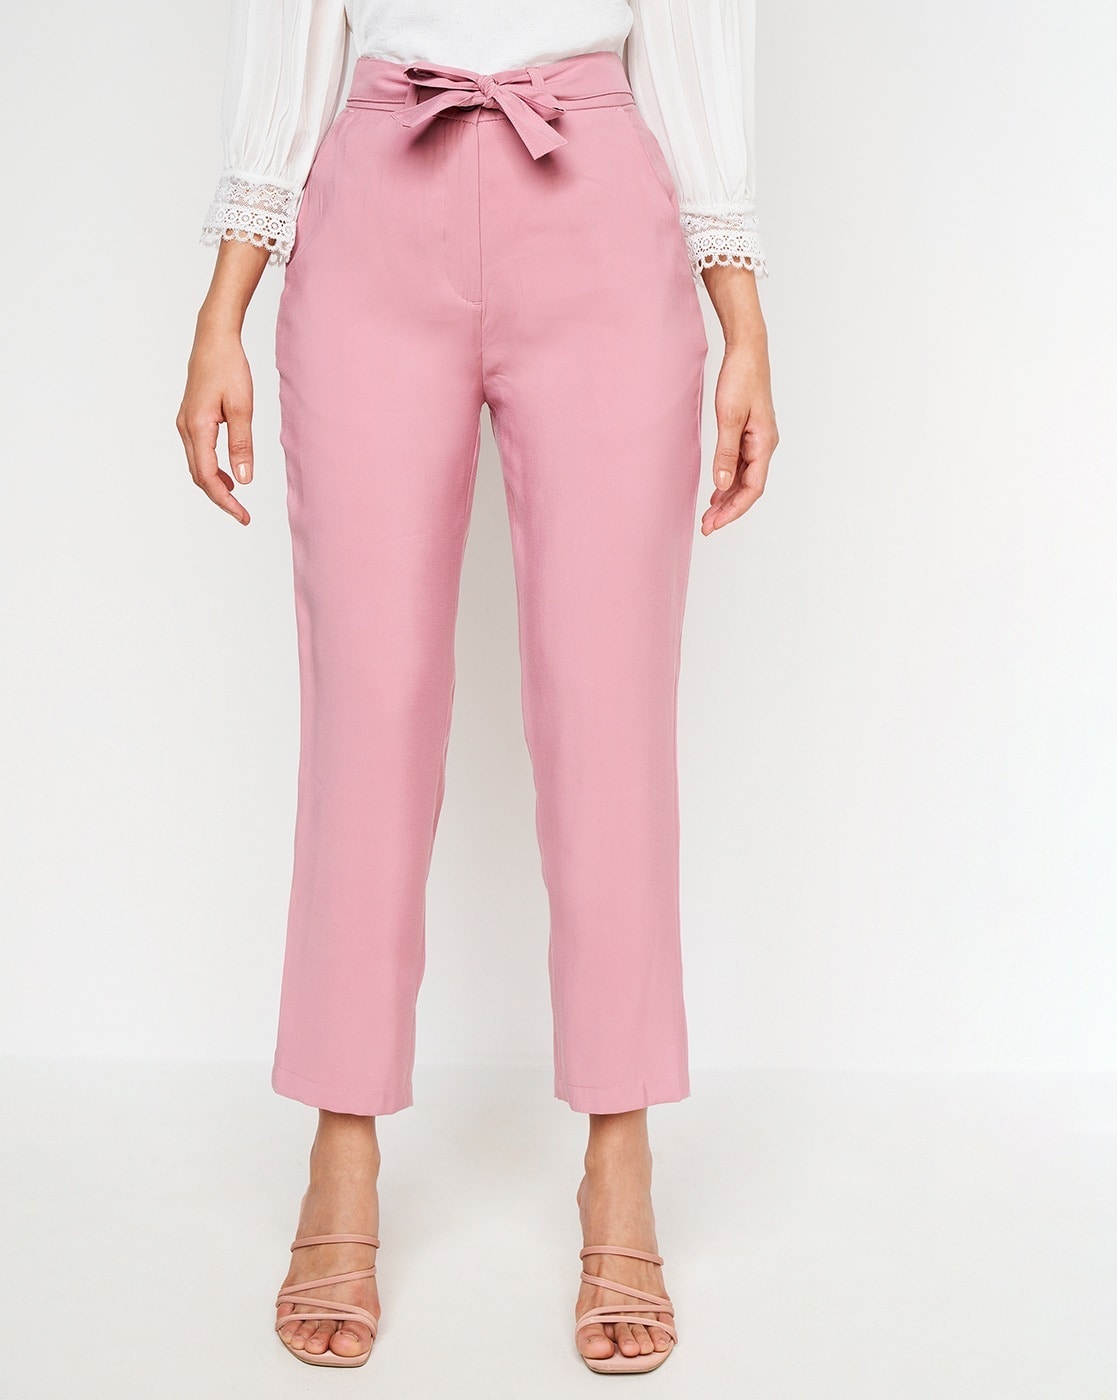 Nude pink trouser ❤️, Women's Fashion, Bottoms, Other Bottoms on Carousell